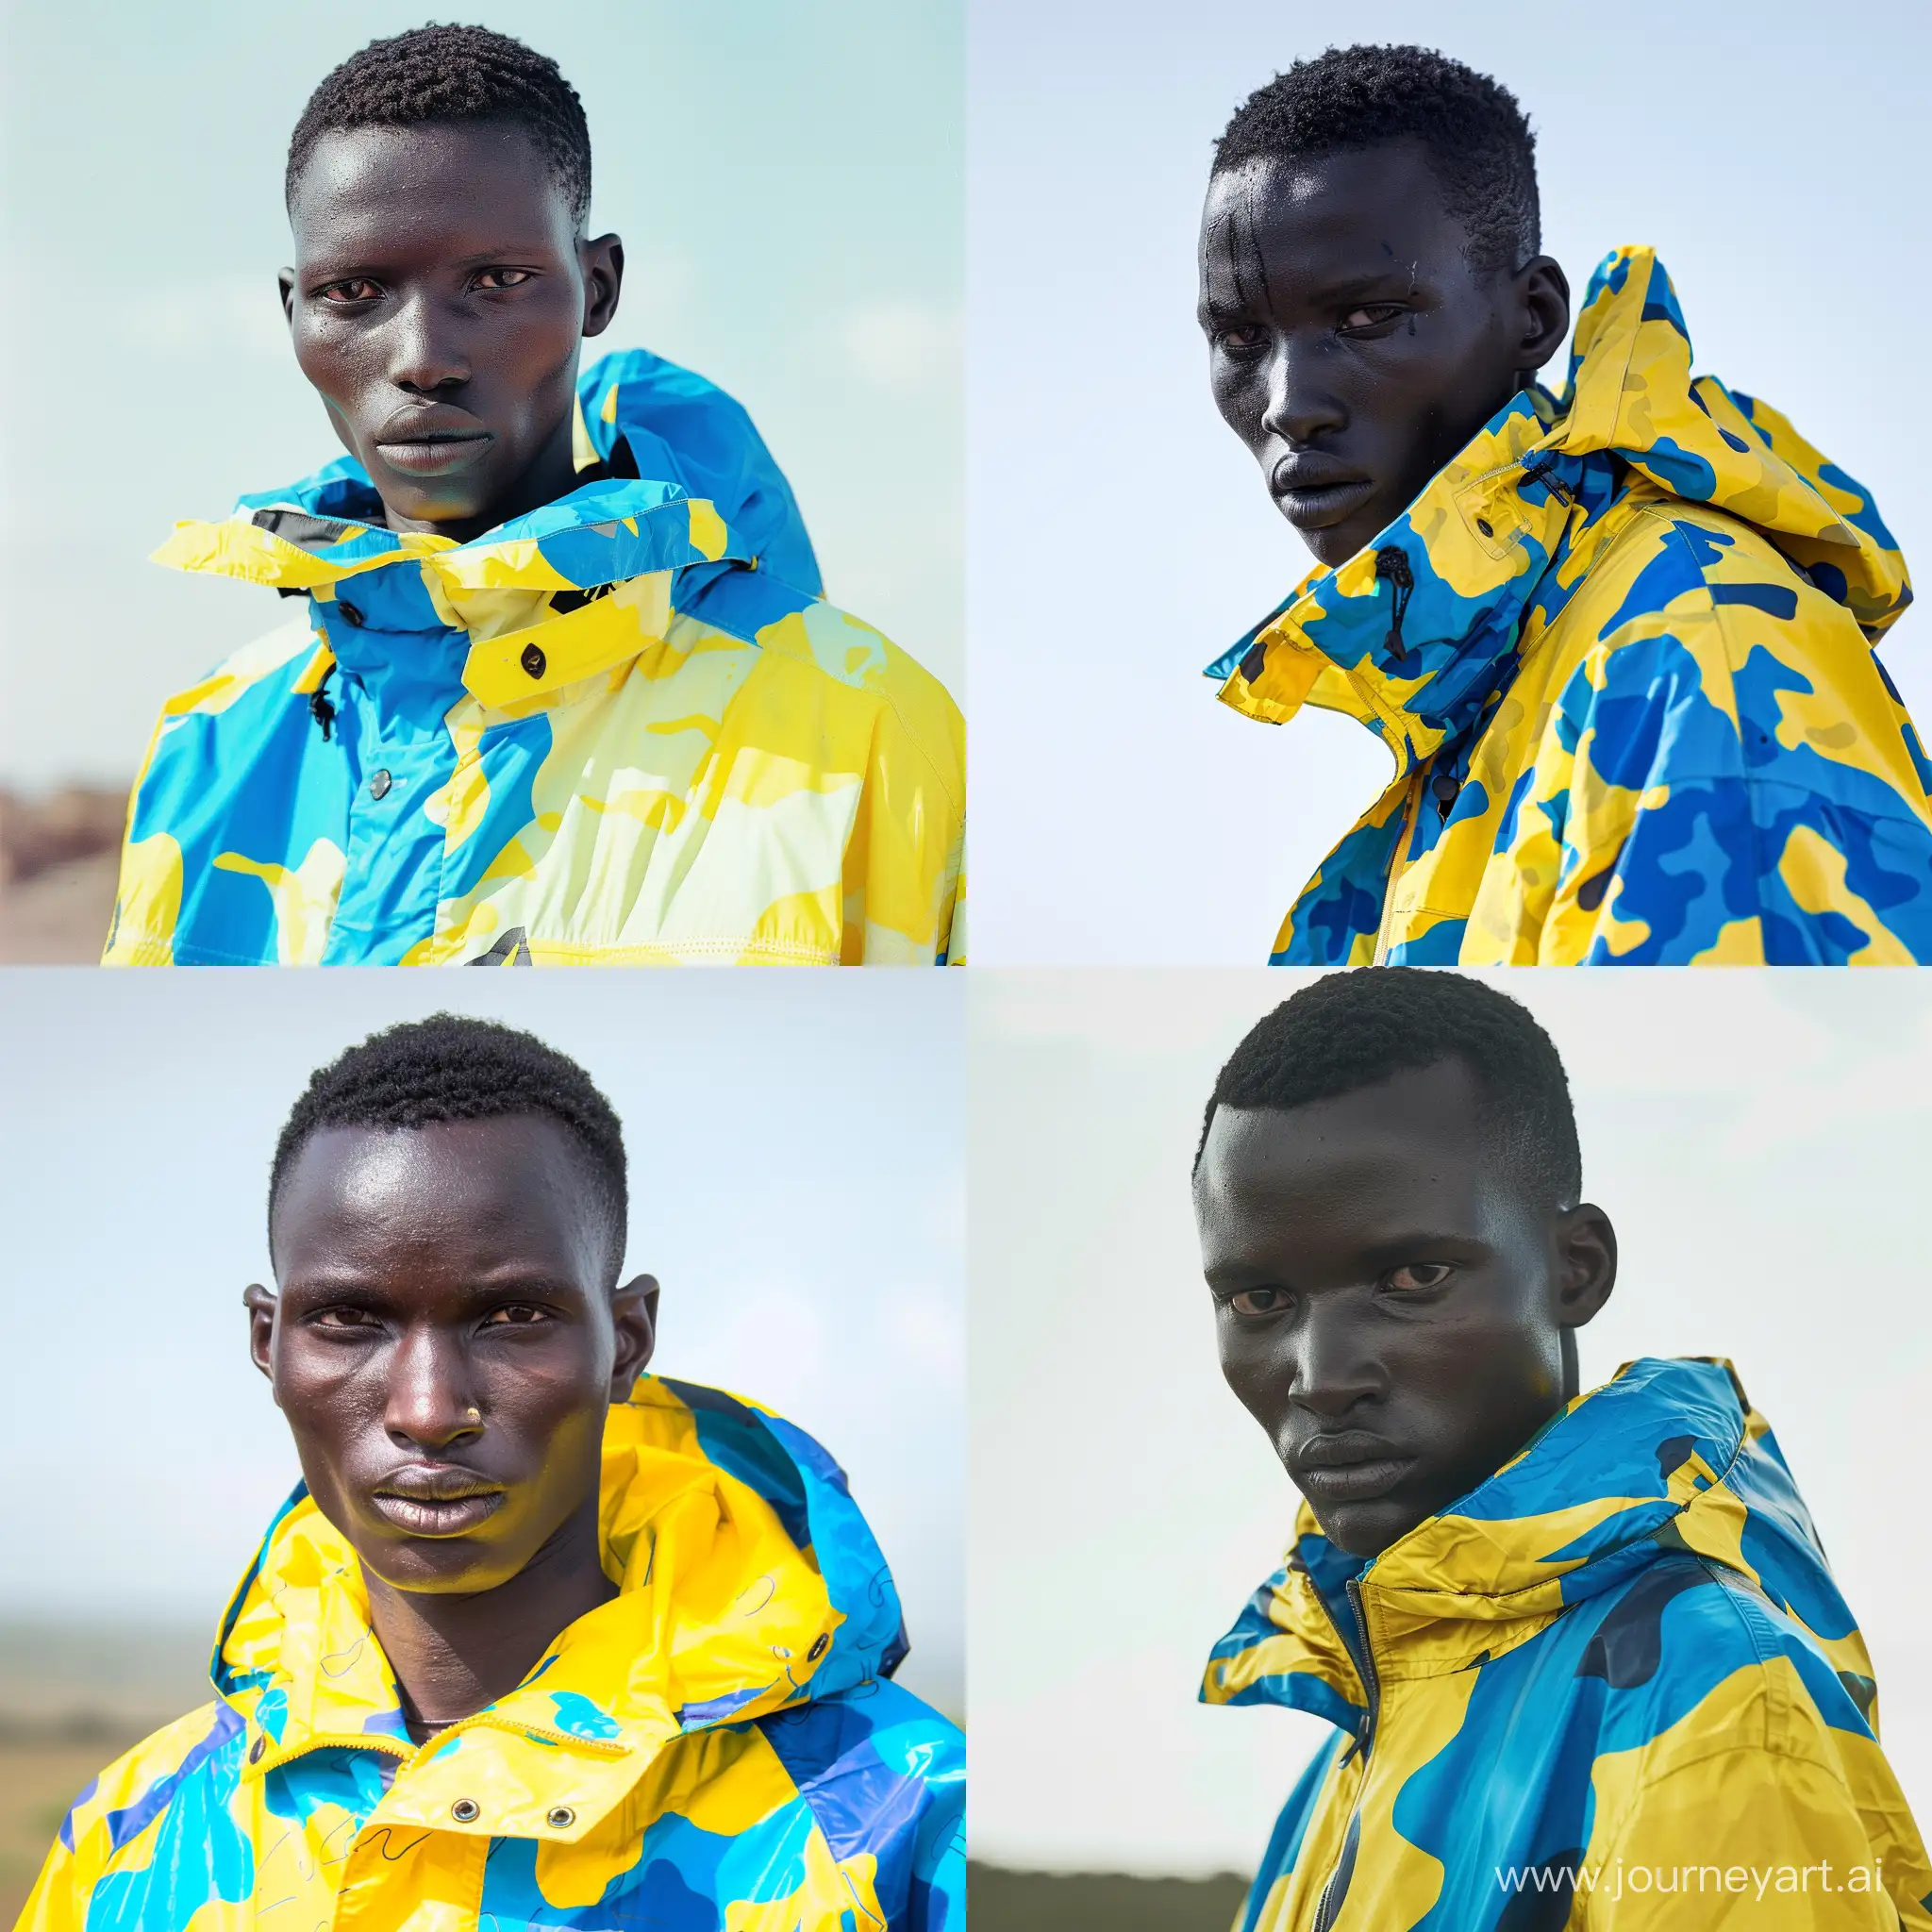 editorial fashion shot, Ethiopia ethnicity, male, short black hair, Intense gaze, pale complexion, vibrant yellow and blue camo jacket, high contrast daylight, vivid and playful mood - - style raw - - s 500